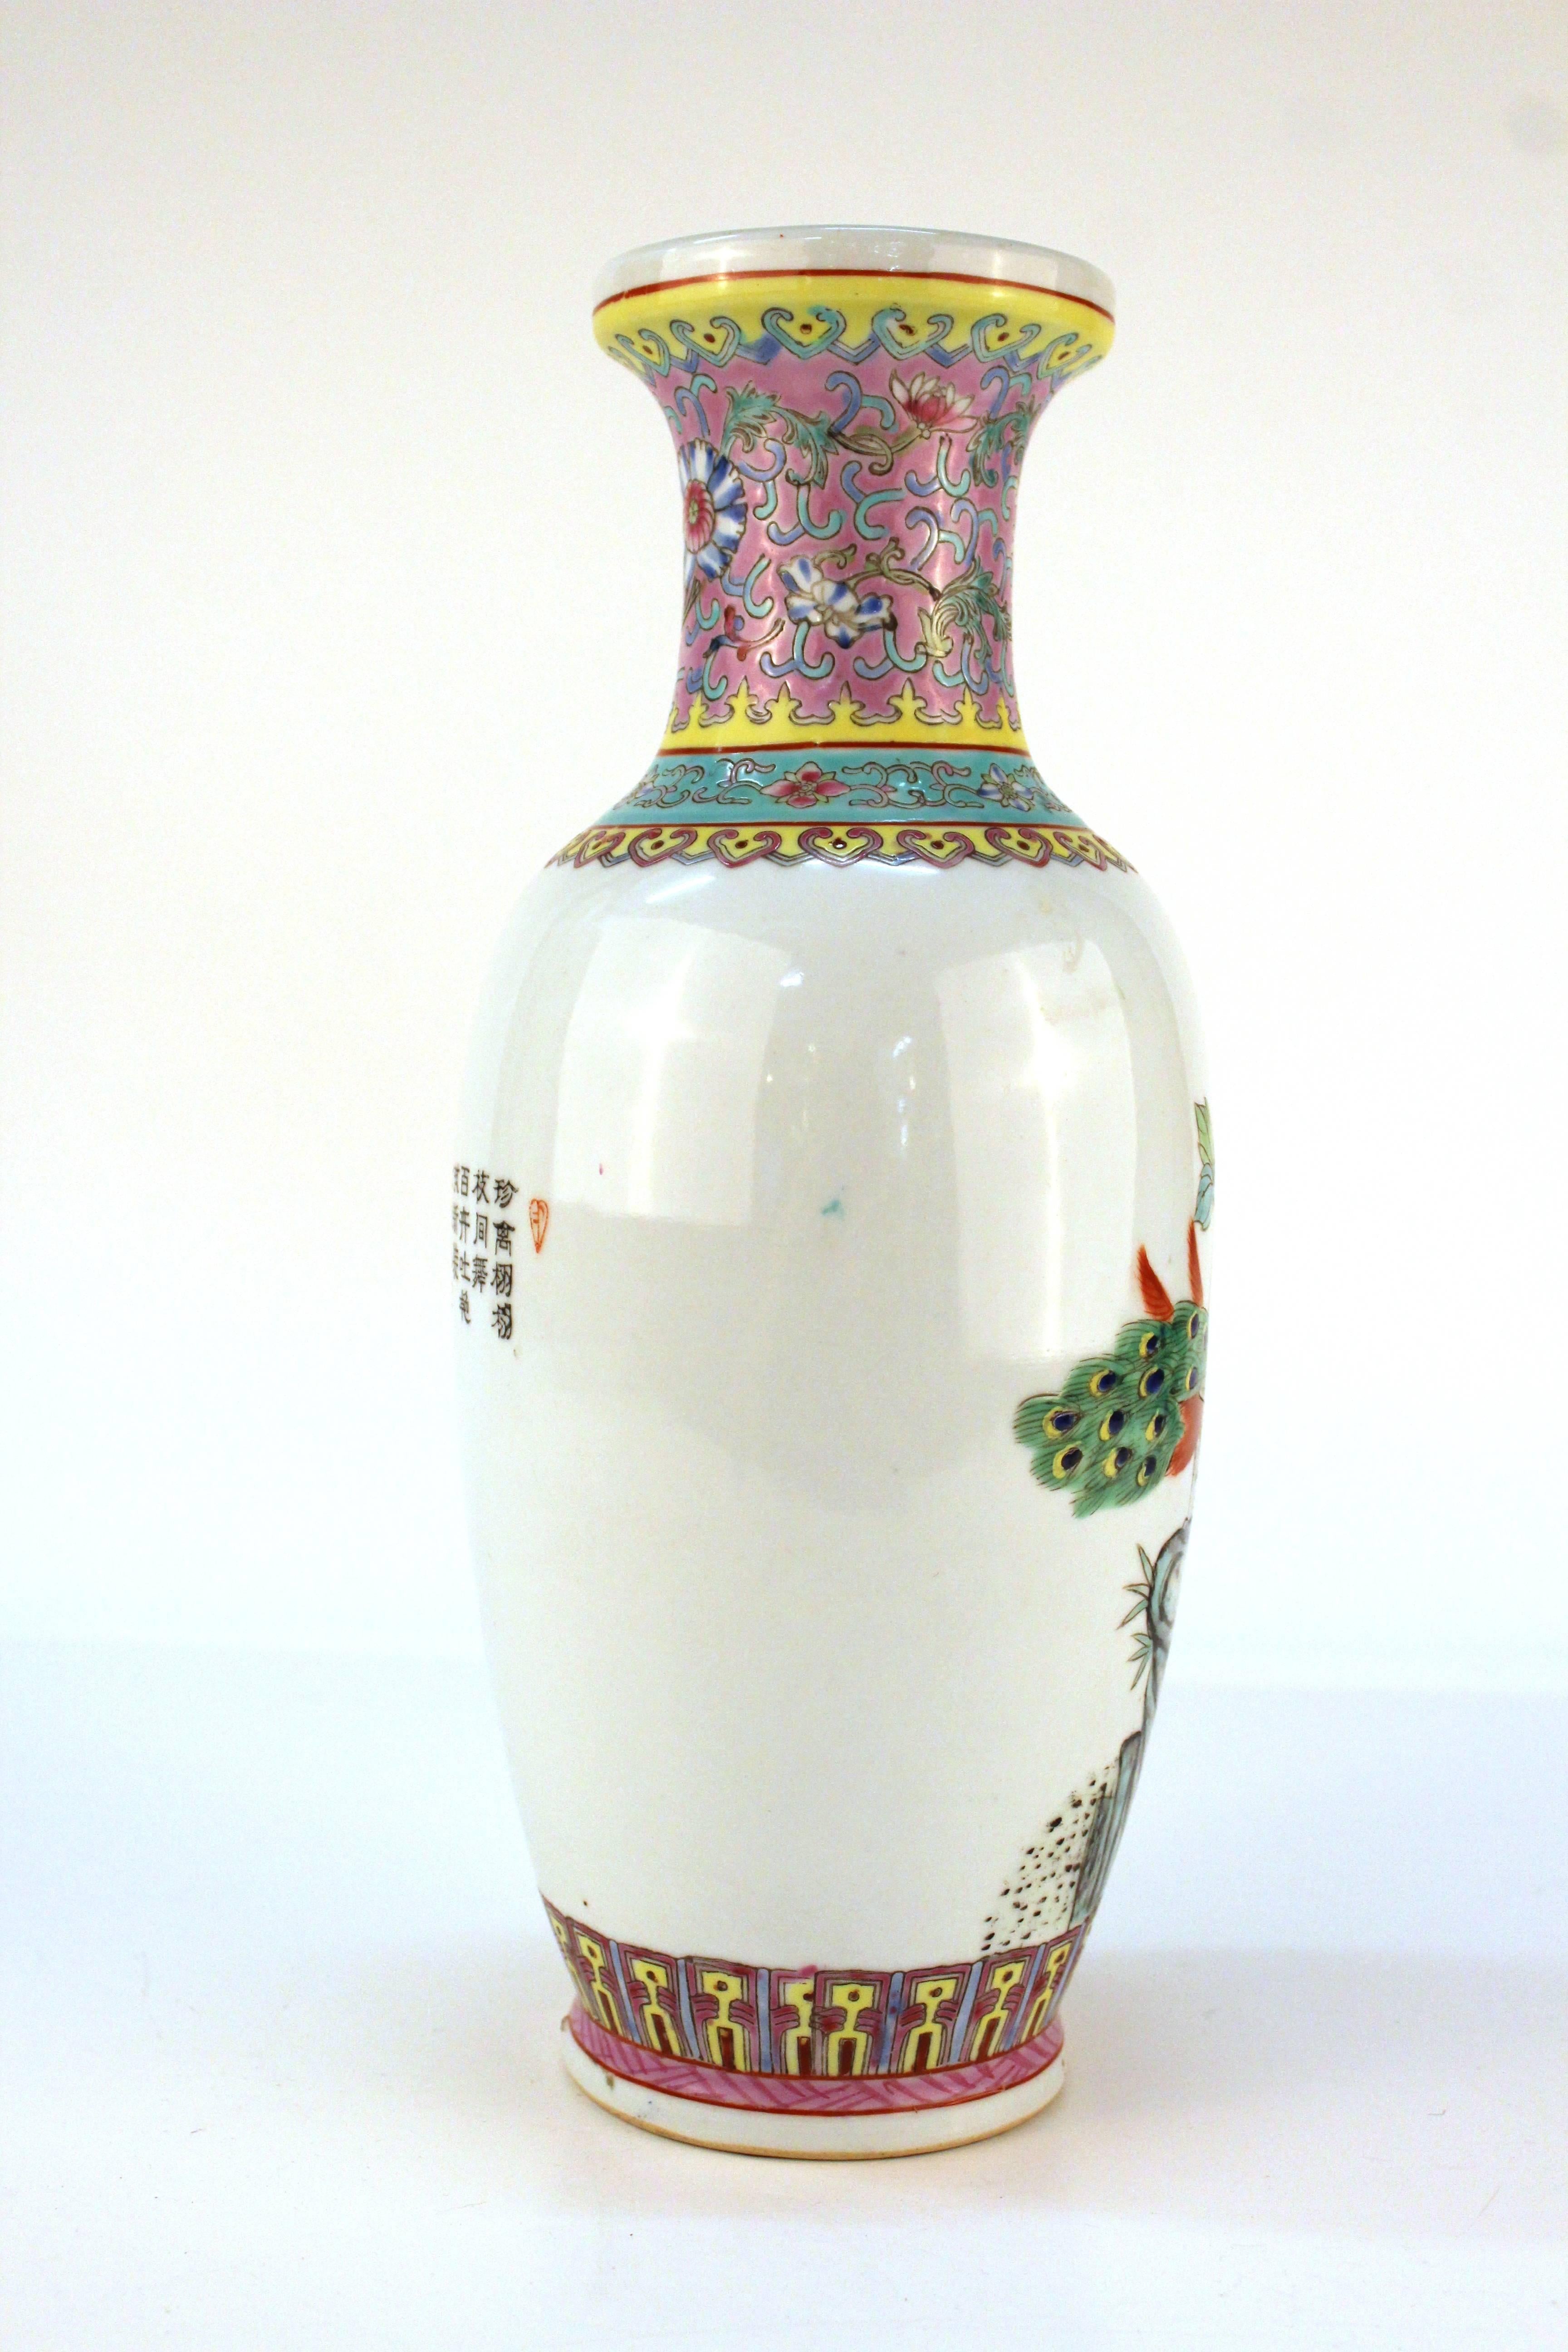 Chinese Famille Rose porcelain vase depicting two peacocks among peony buds. Heavily decorated on the neck and base in bright pink, yellow and turquoise floral patterns. Stamped on the bottom. In overall all good vintage condition. 

110618

 